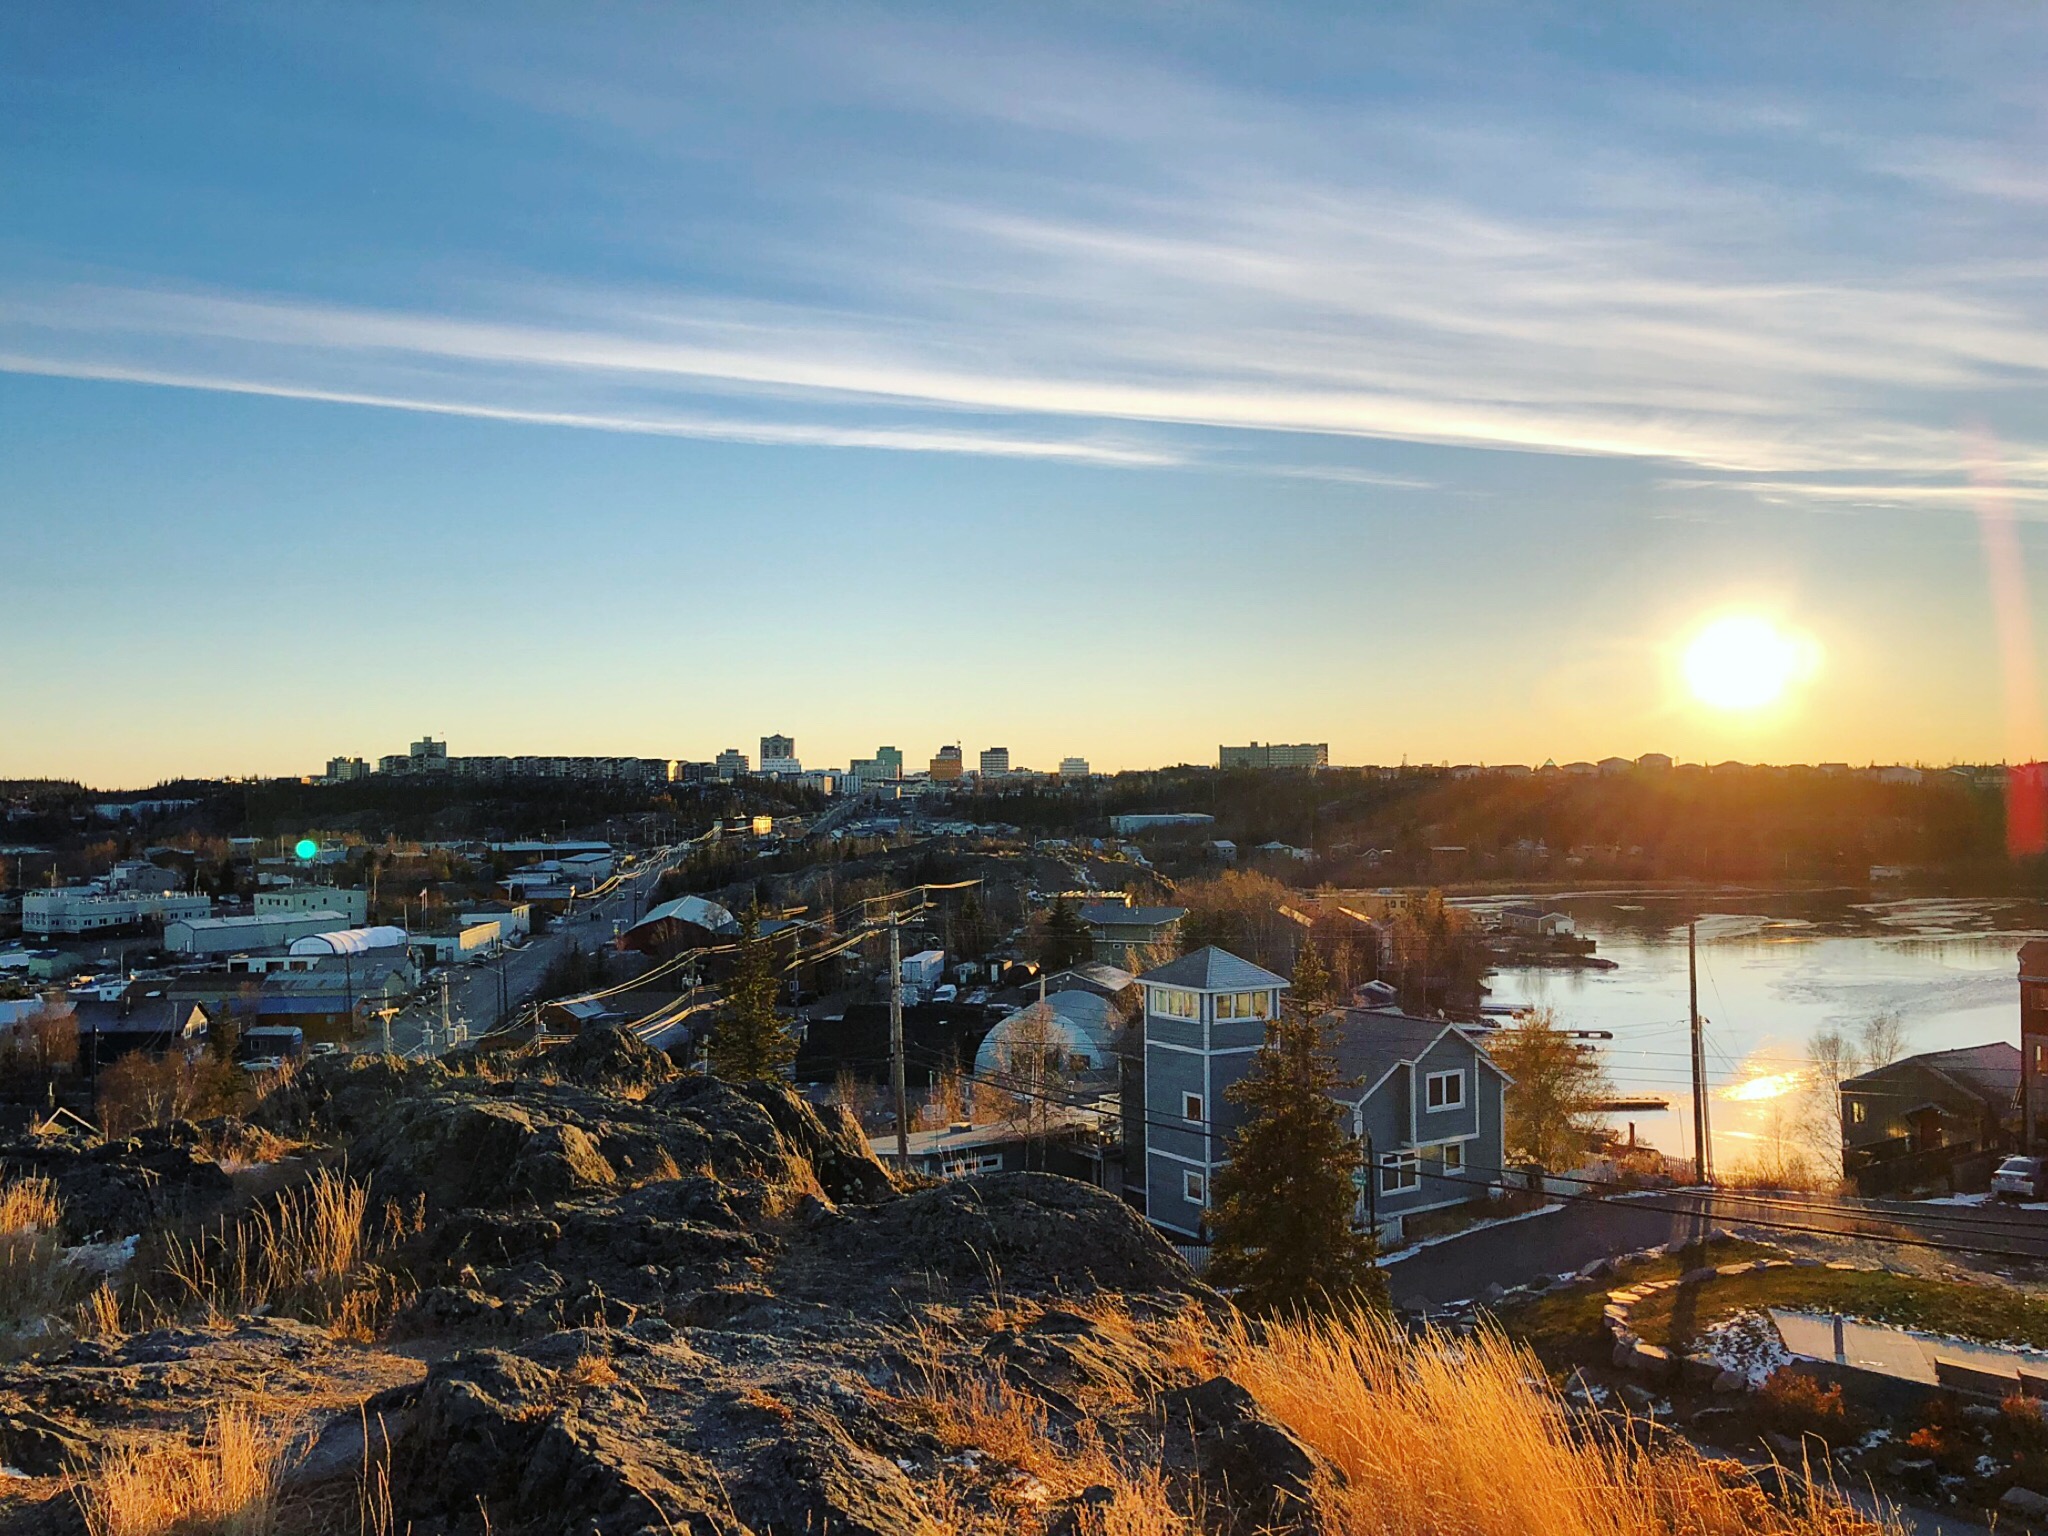 View of the city of Yellowknife, Canada with the sun setting in the background